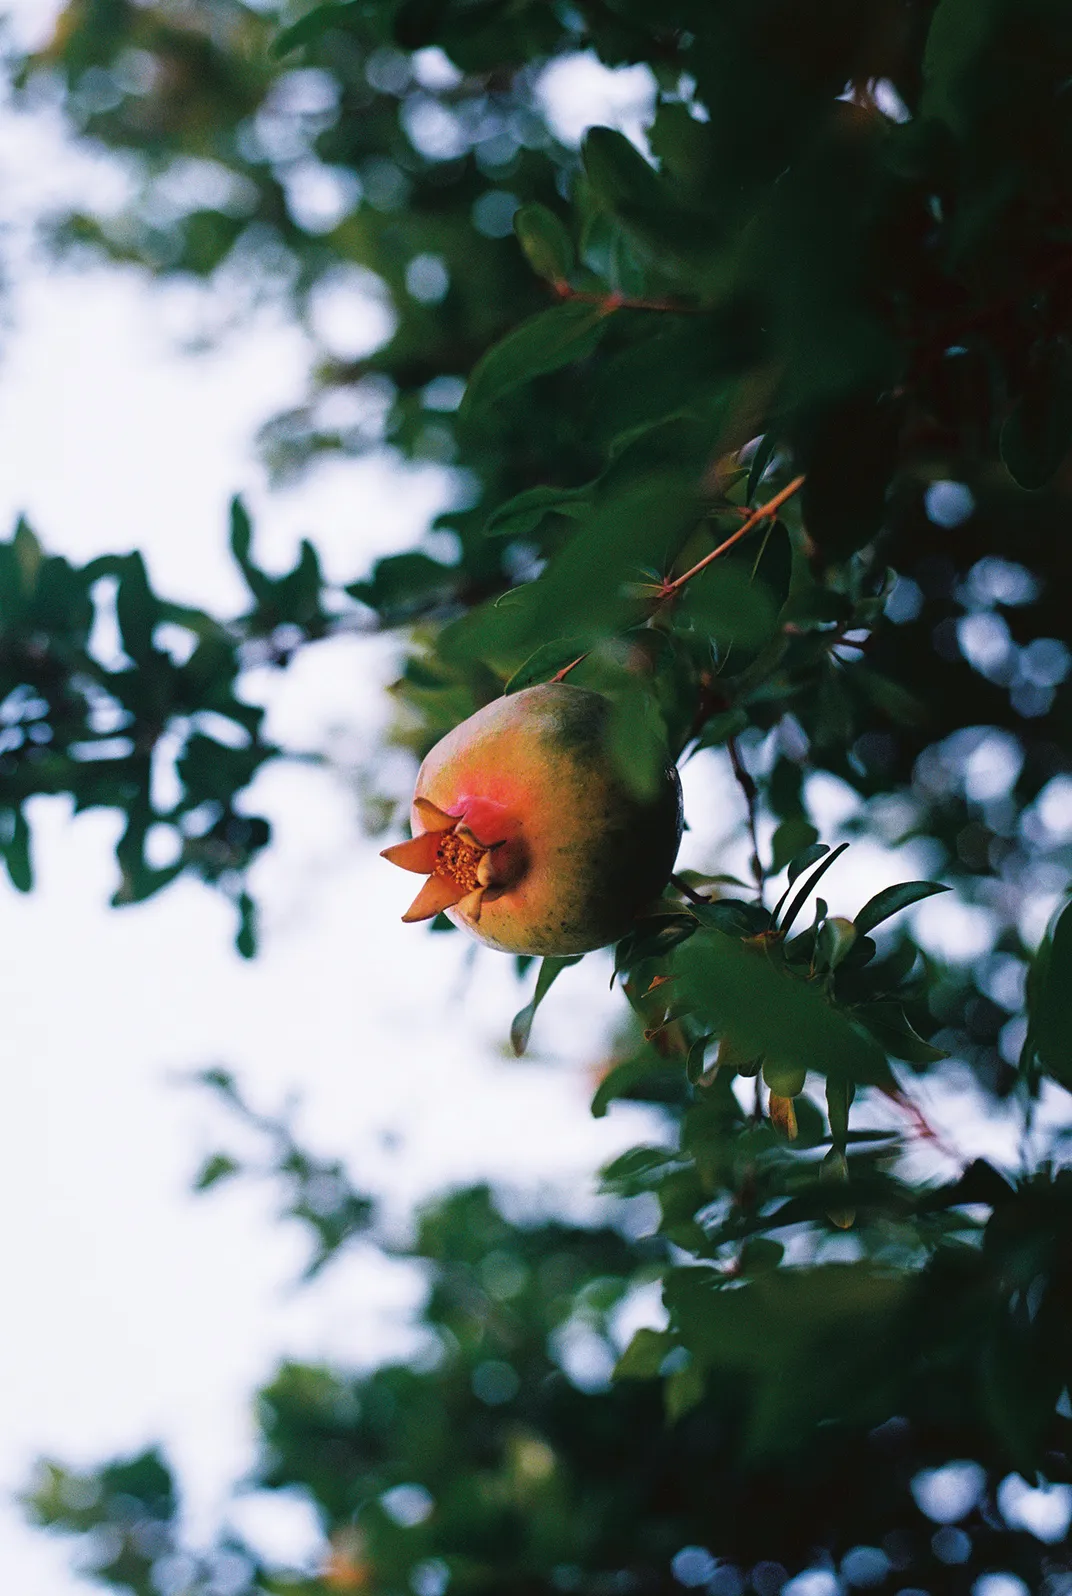 pomegranate hangs in a tree